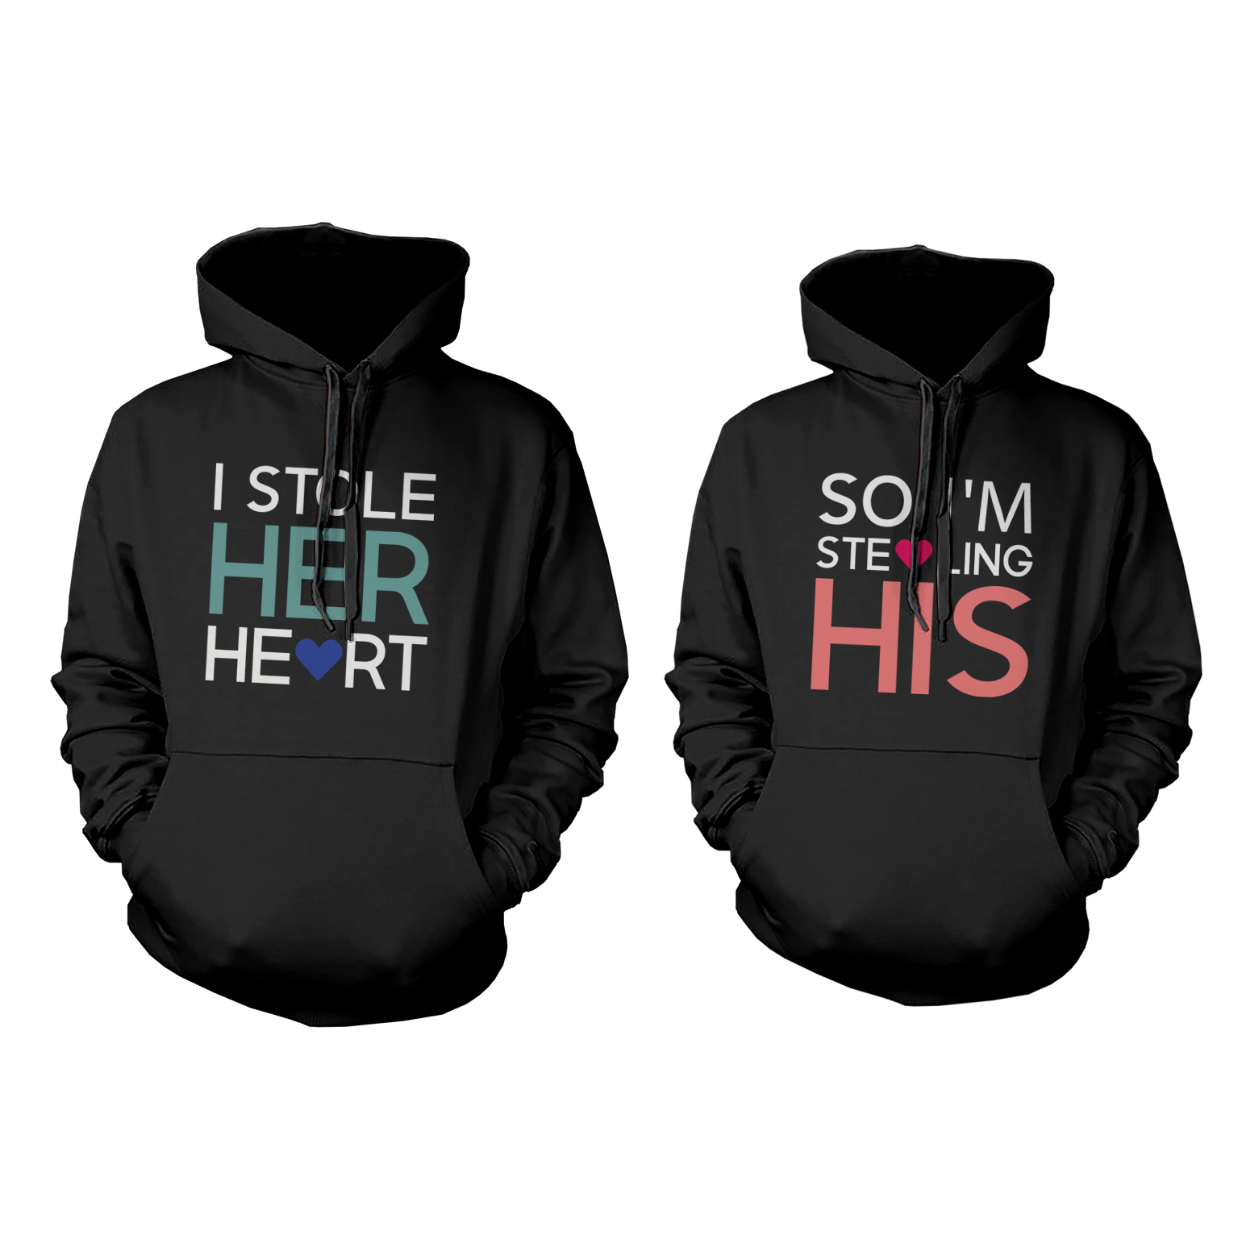 Stealing Hearts Romantic Hoodies For Couples